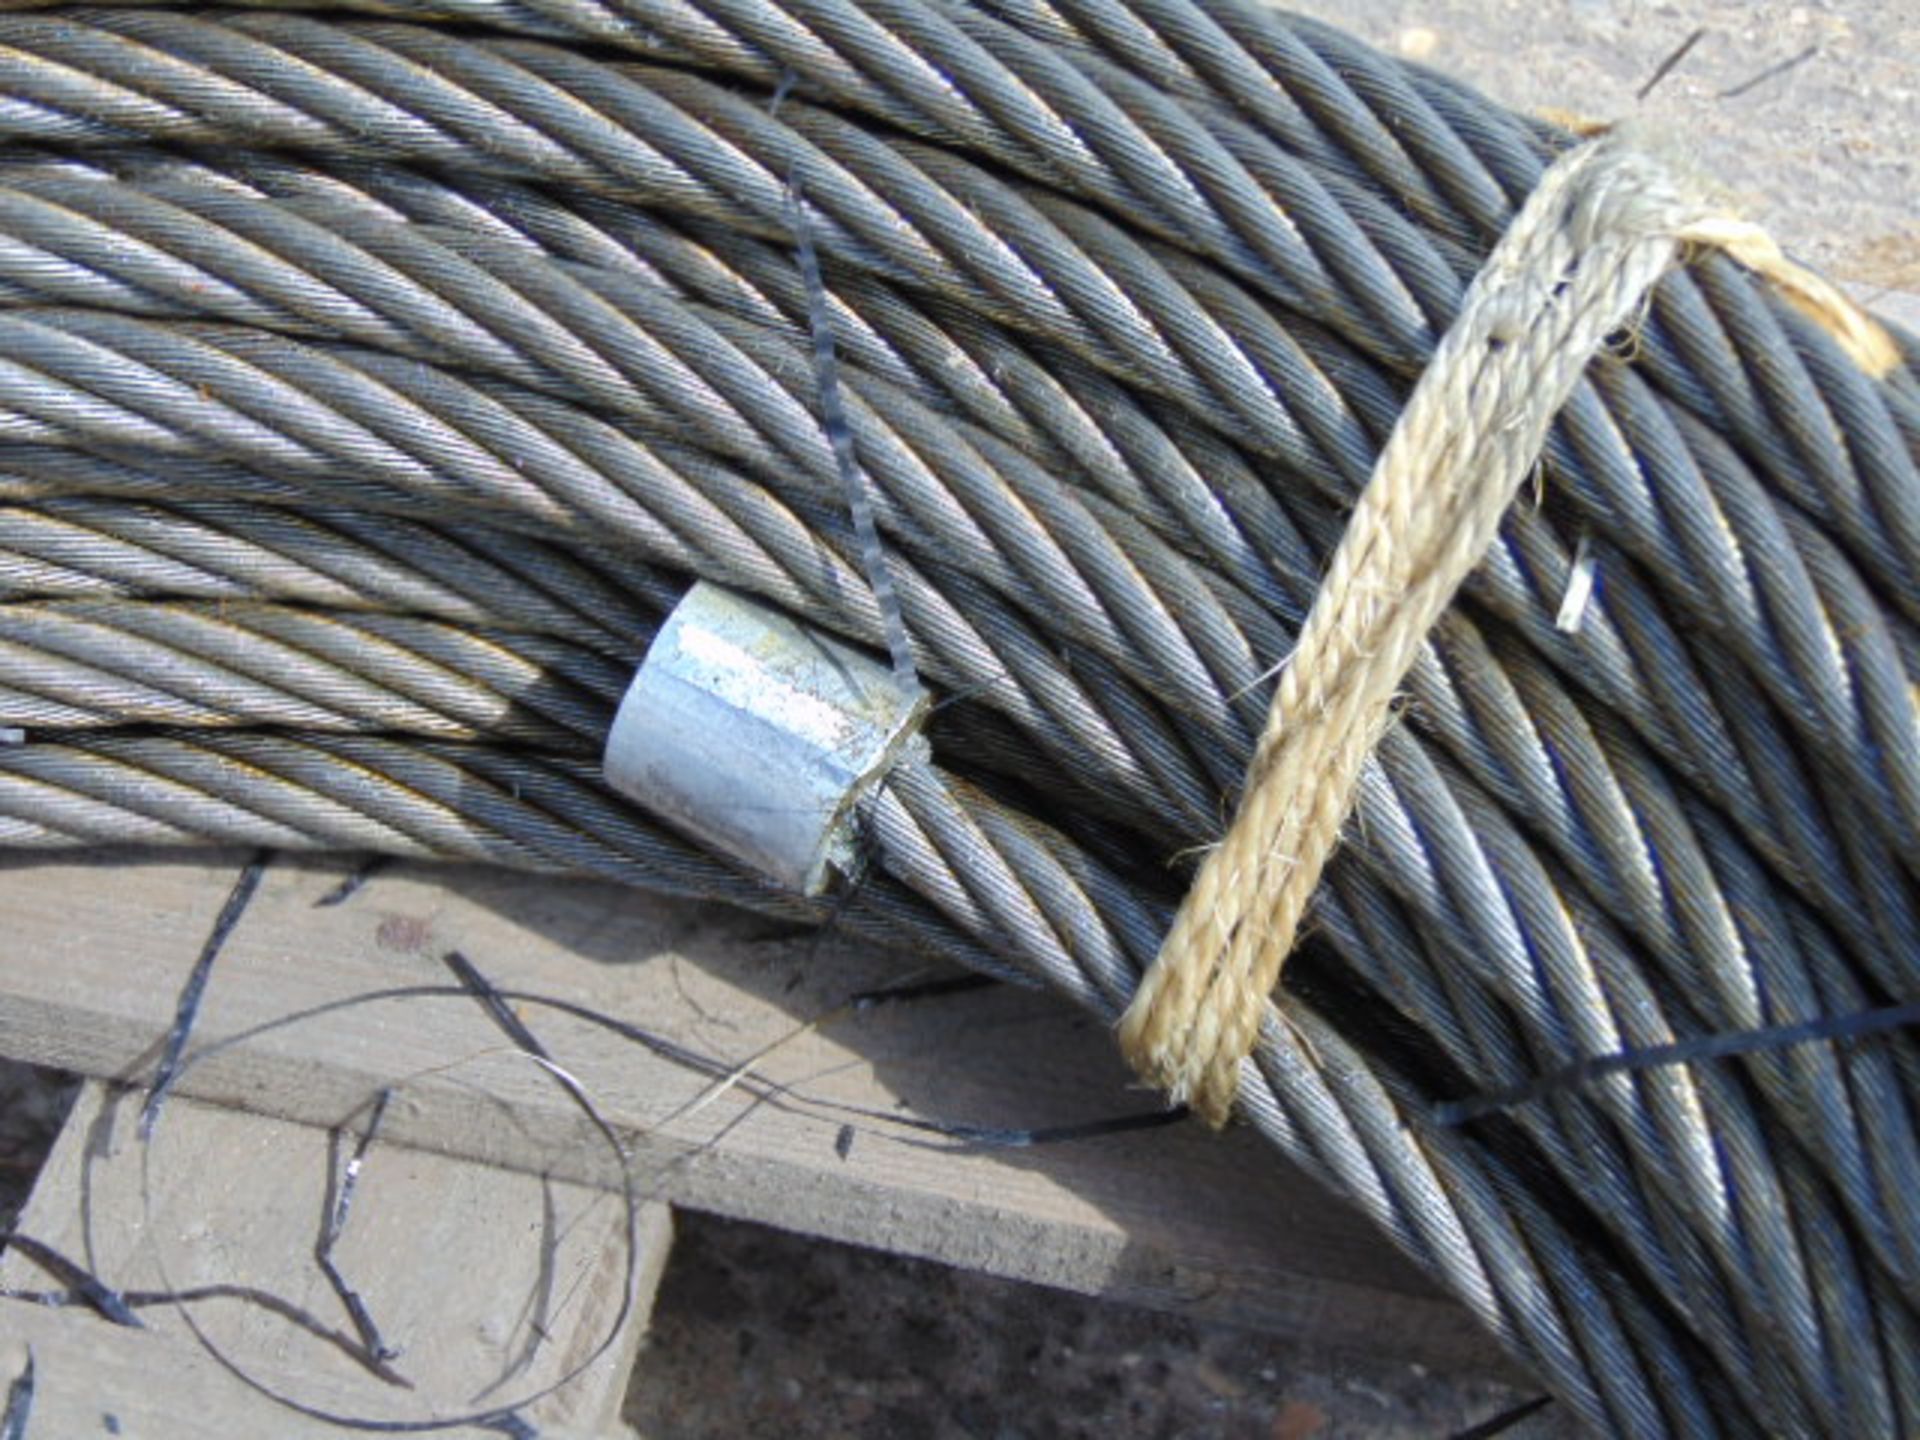 Heavy Duty Hall Bros Roll of 60m 19mm 21.5 tonne Crane/Winch Wire Rope - Image 4 of 5